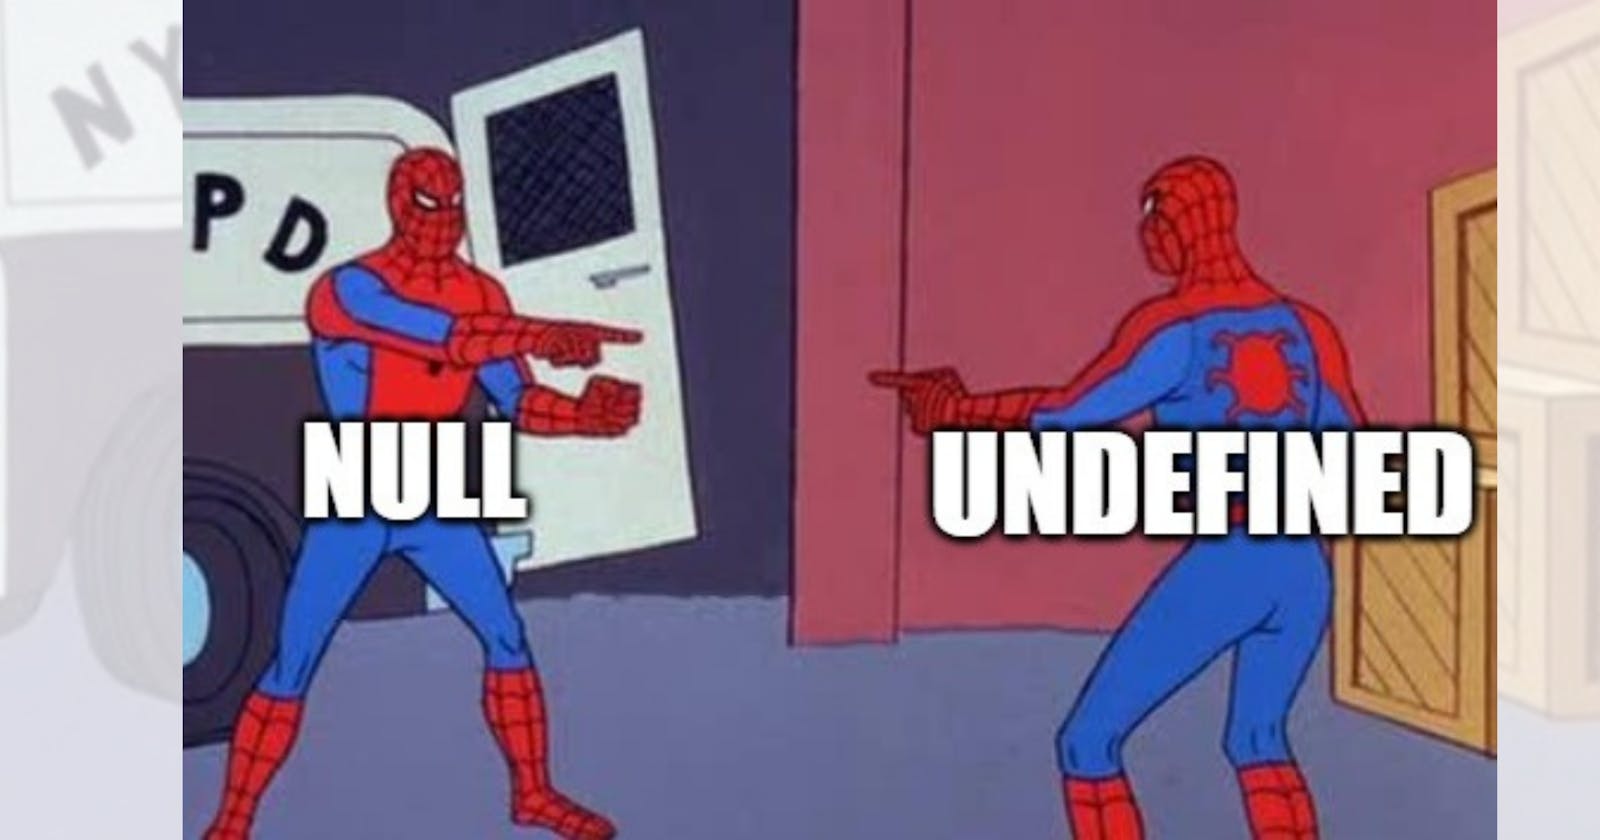 Null vs Undefined in JavaScript